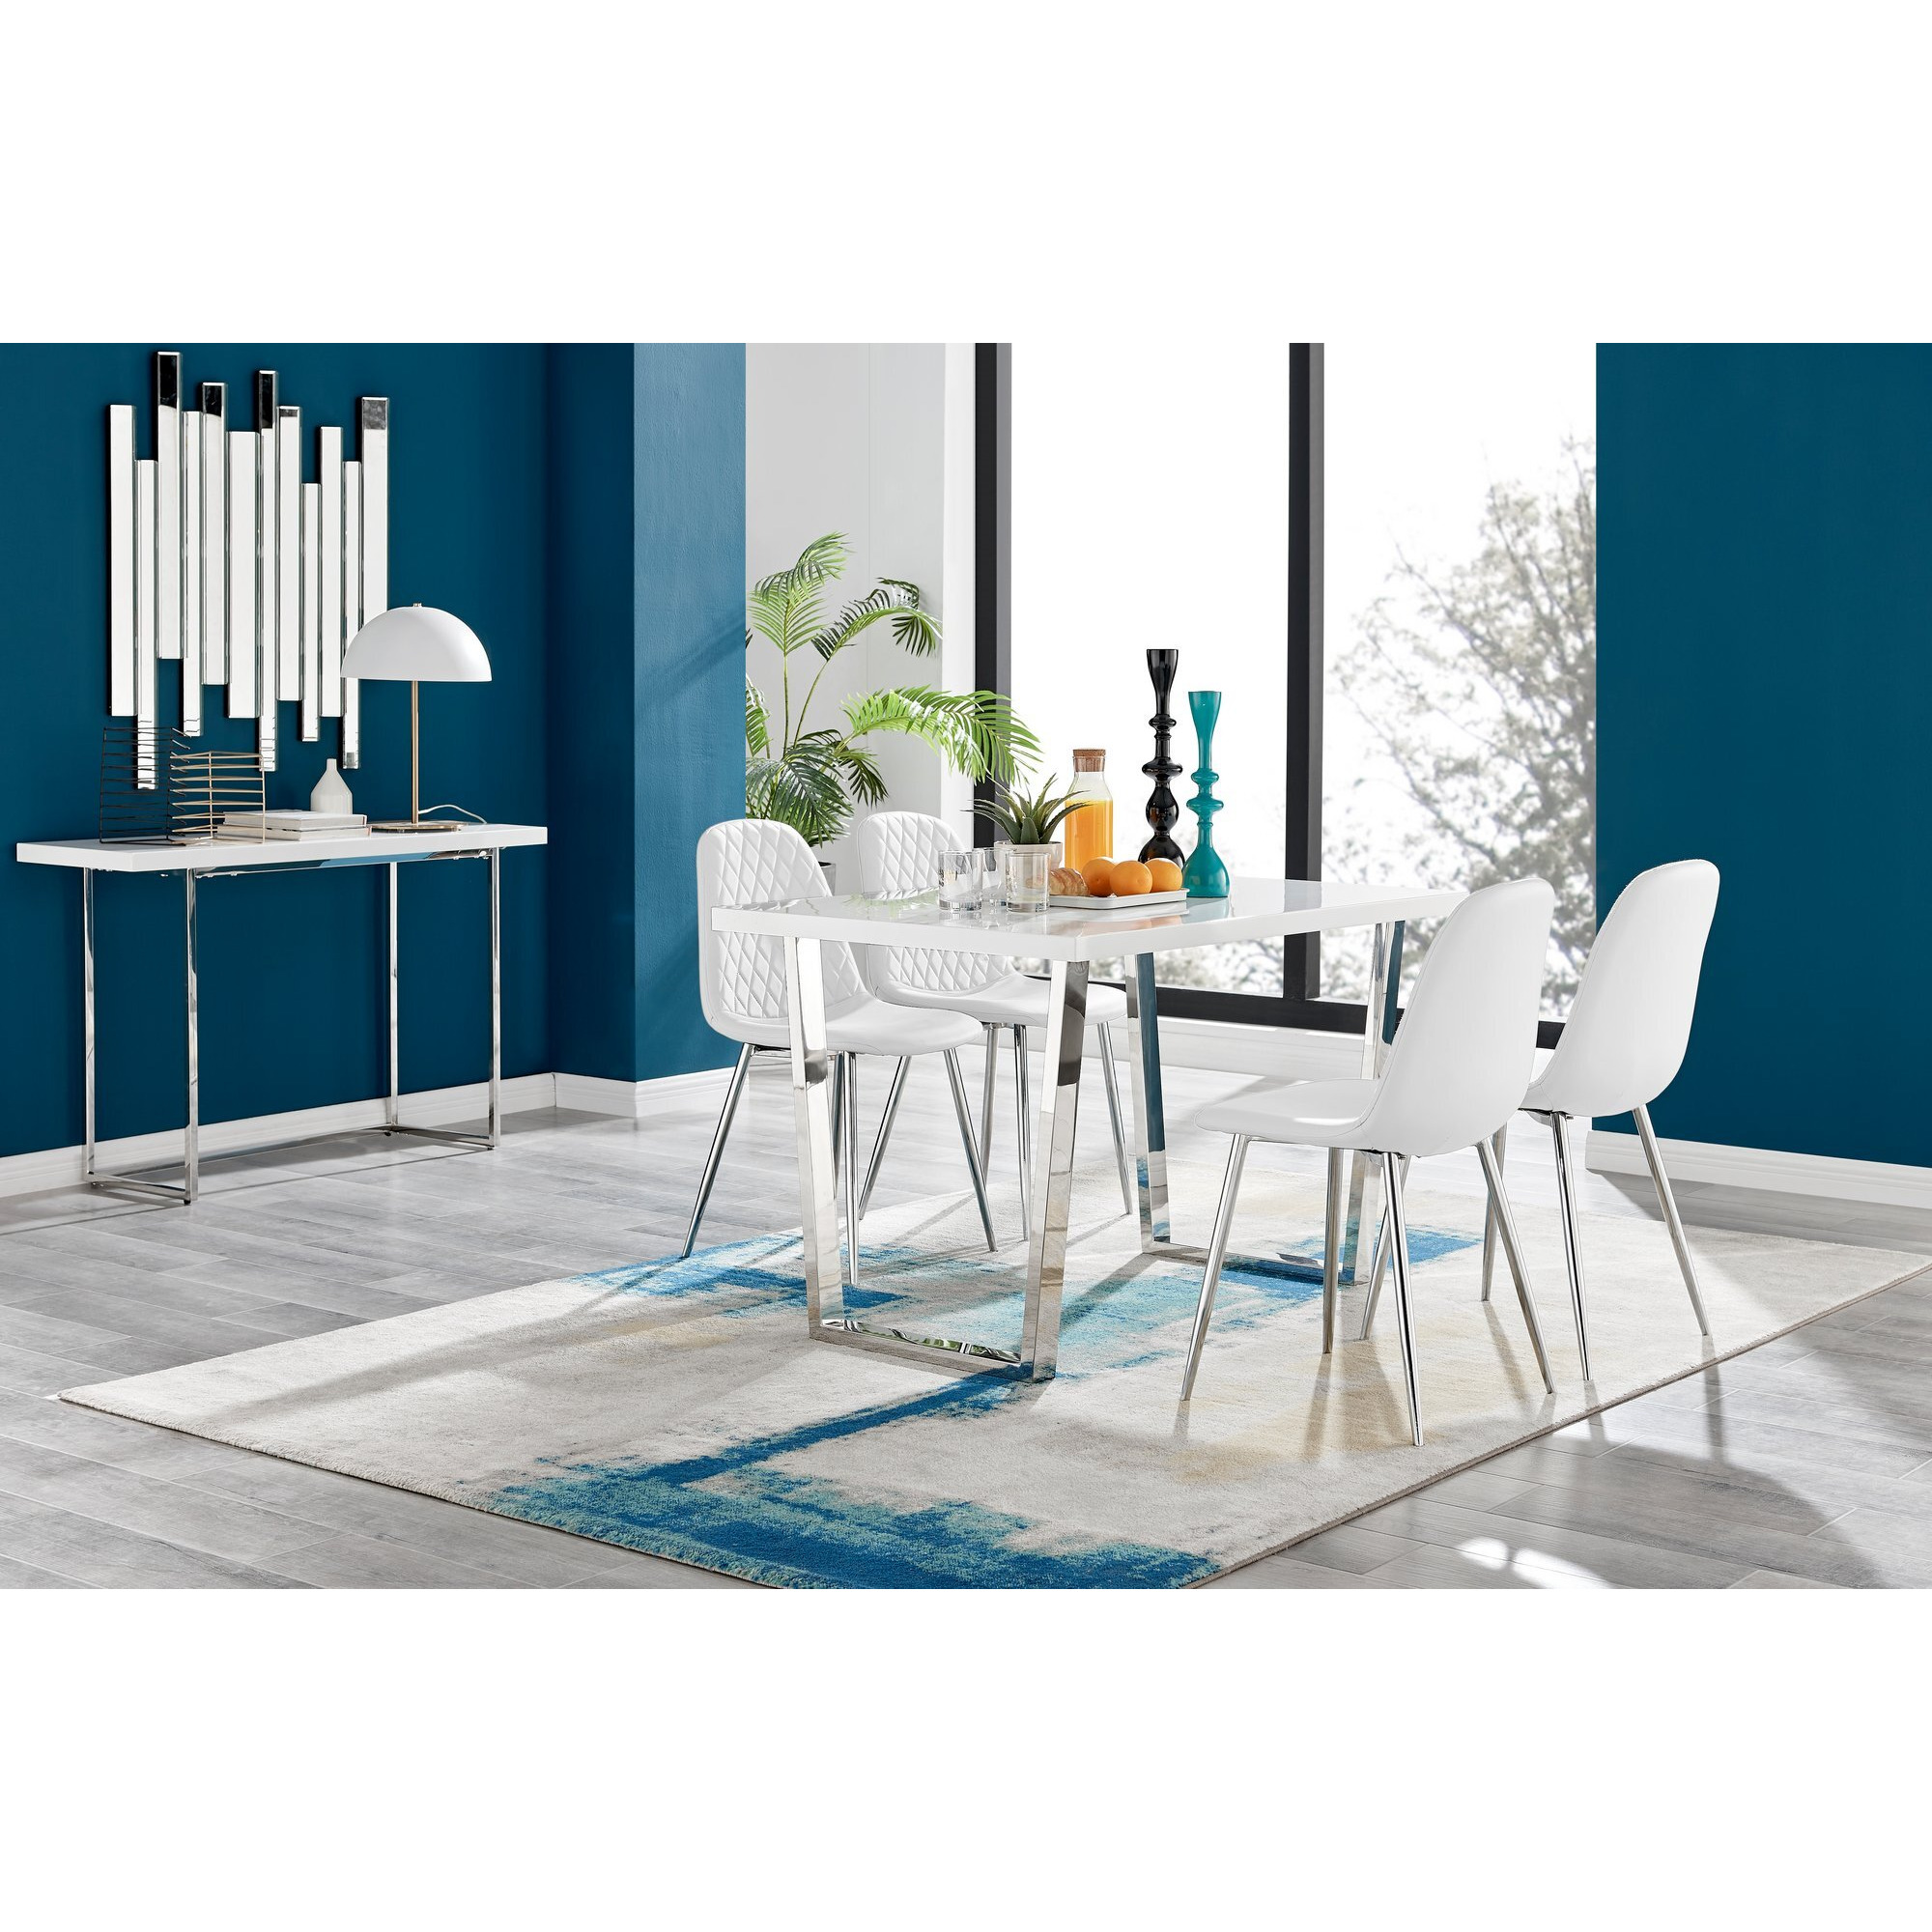 Kylo White High Gloss Dining Table & 4 Corona Silver Chairs